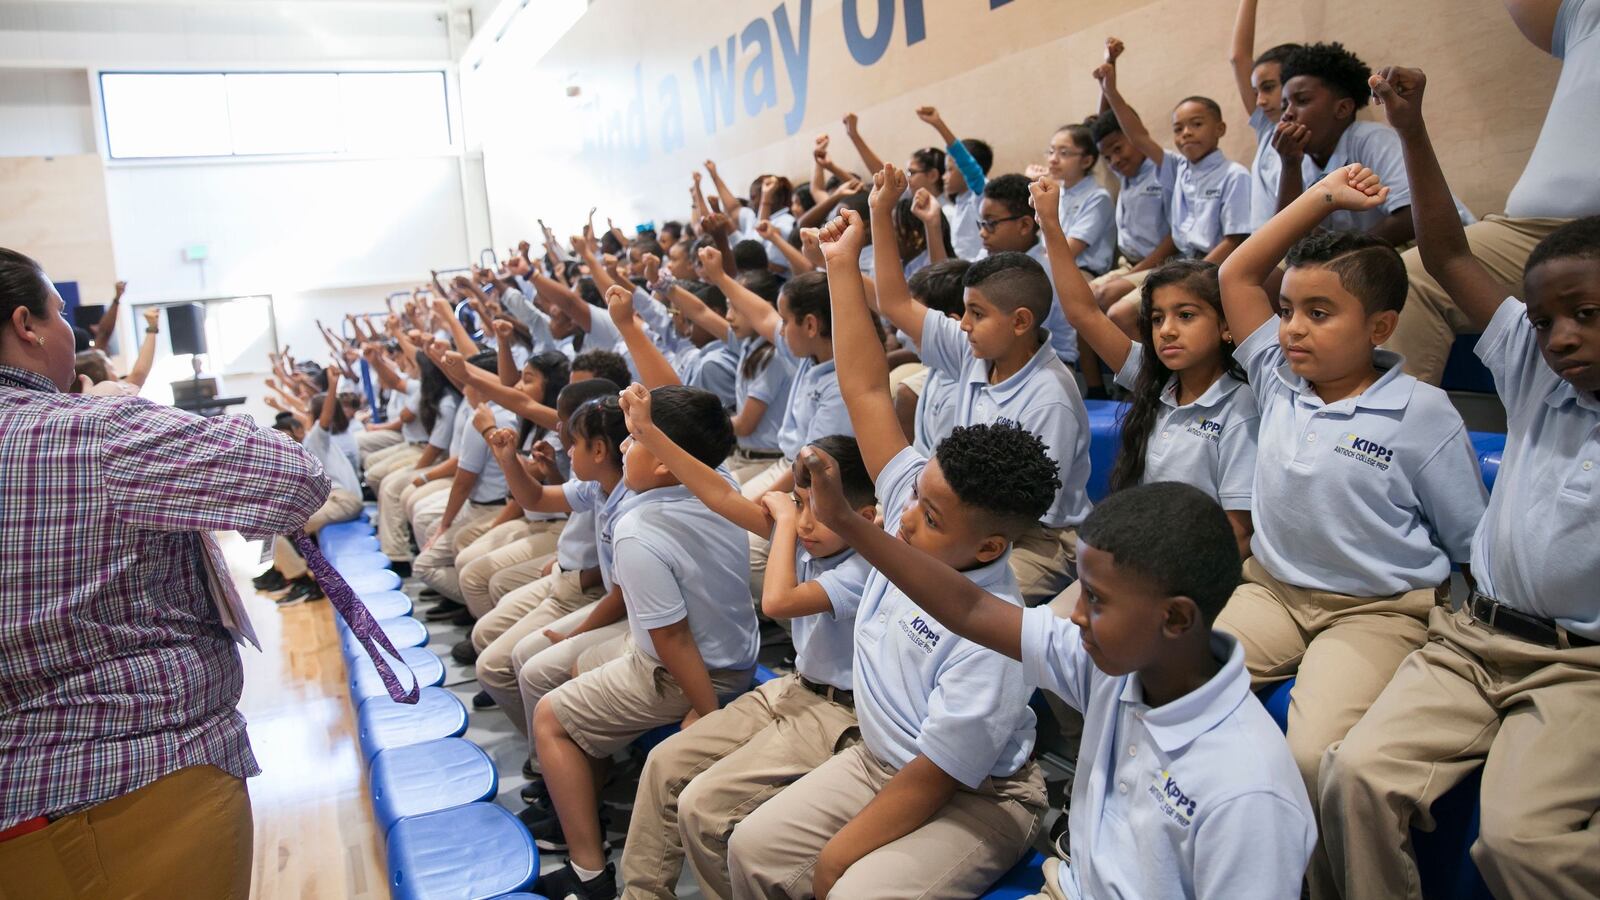 A large group of students, wearing light blue shirts and khaki pants, raise their hands seated on bleachers while educators stand in front of them.